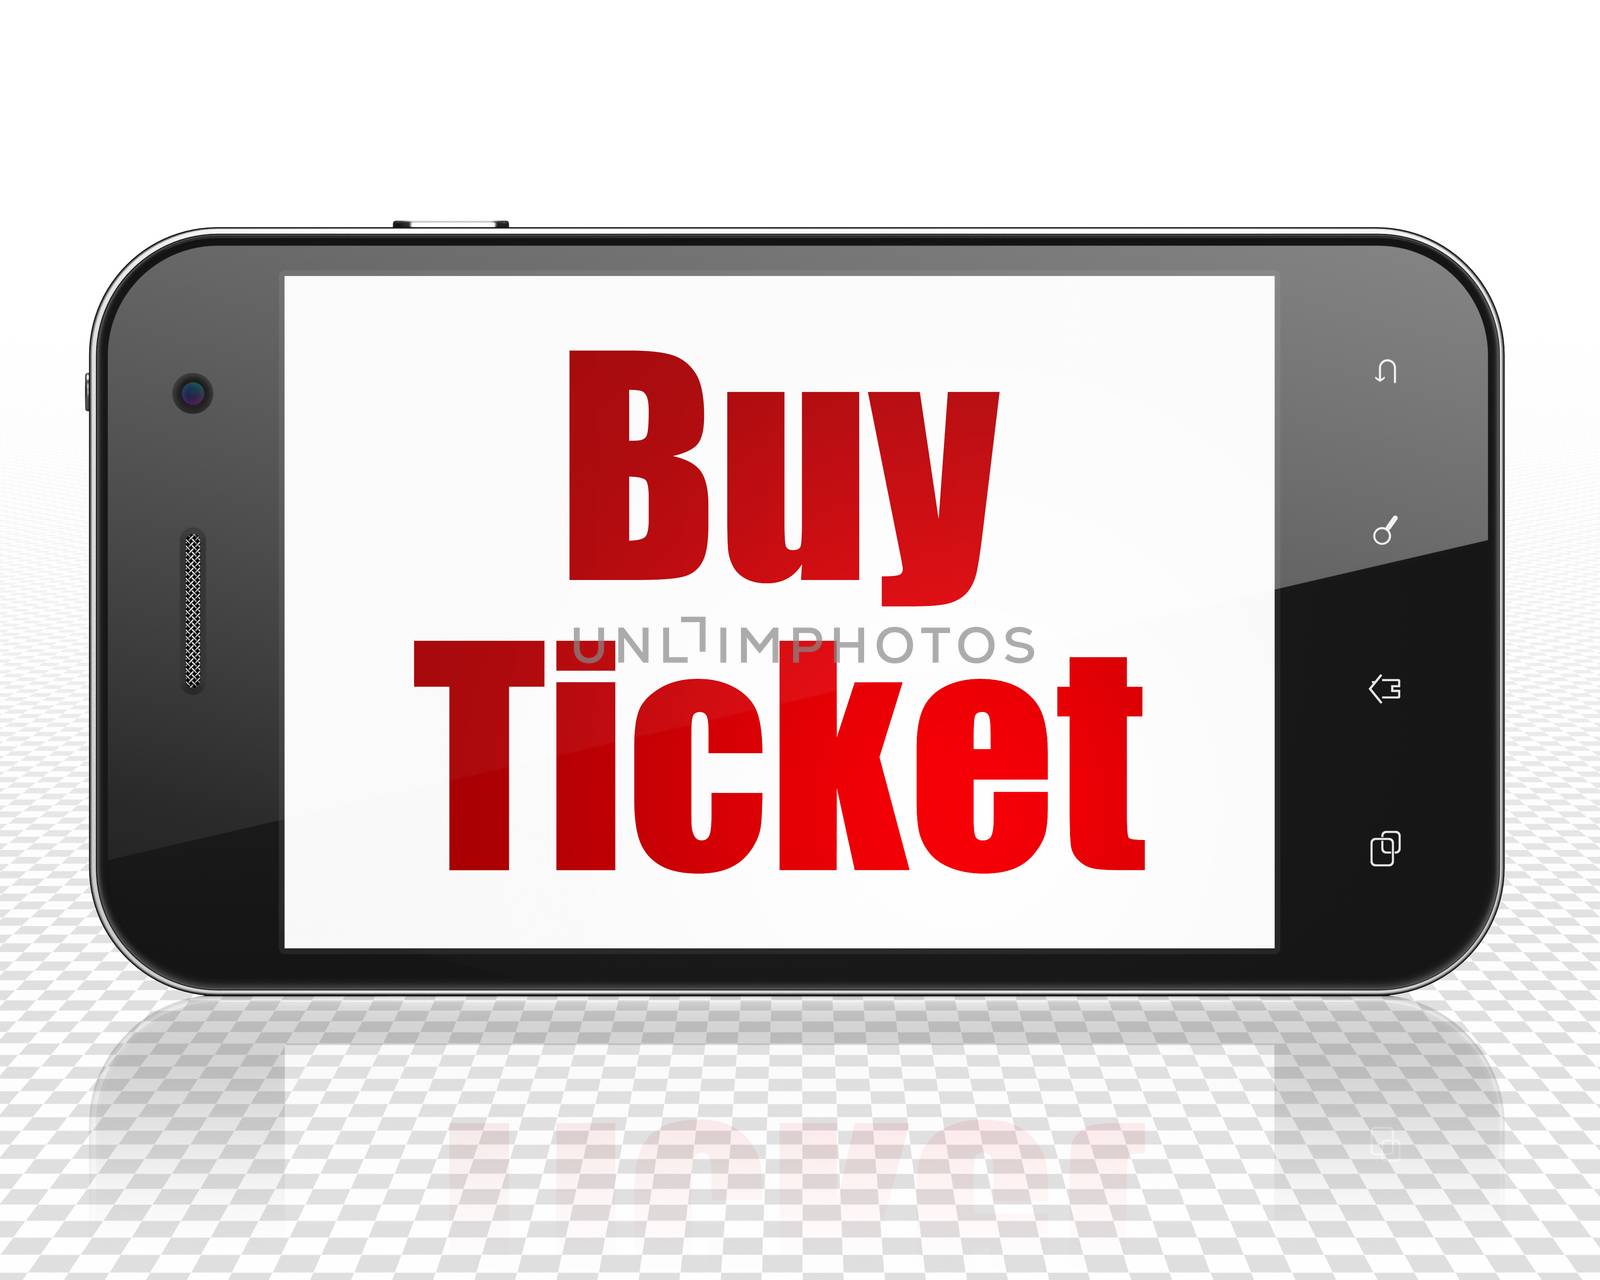 Vacation concept: Smartphone with red text Buy Ticket on display